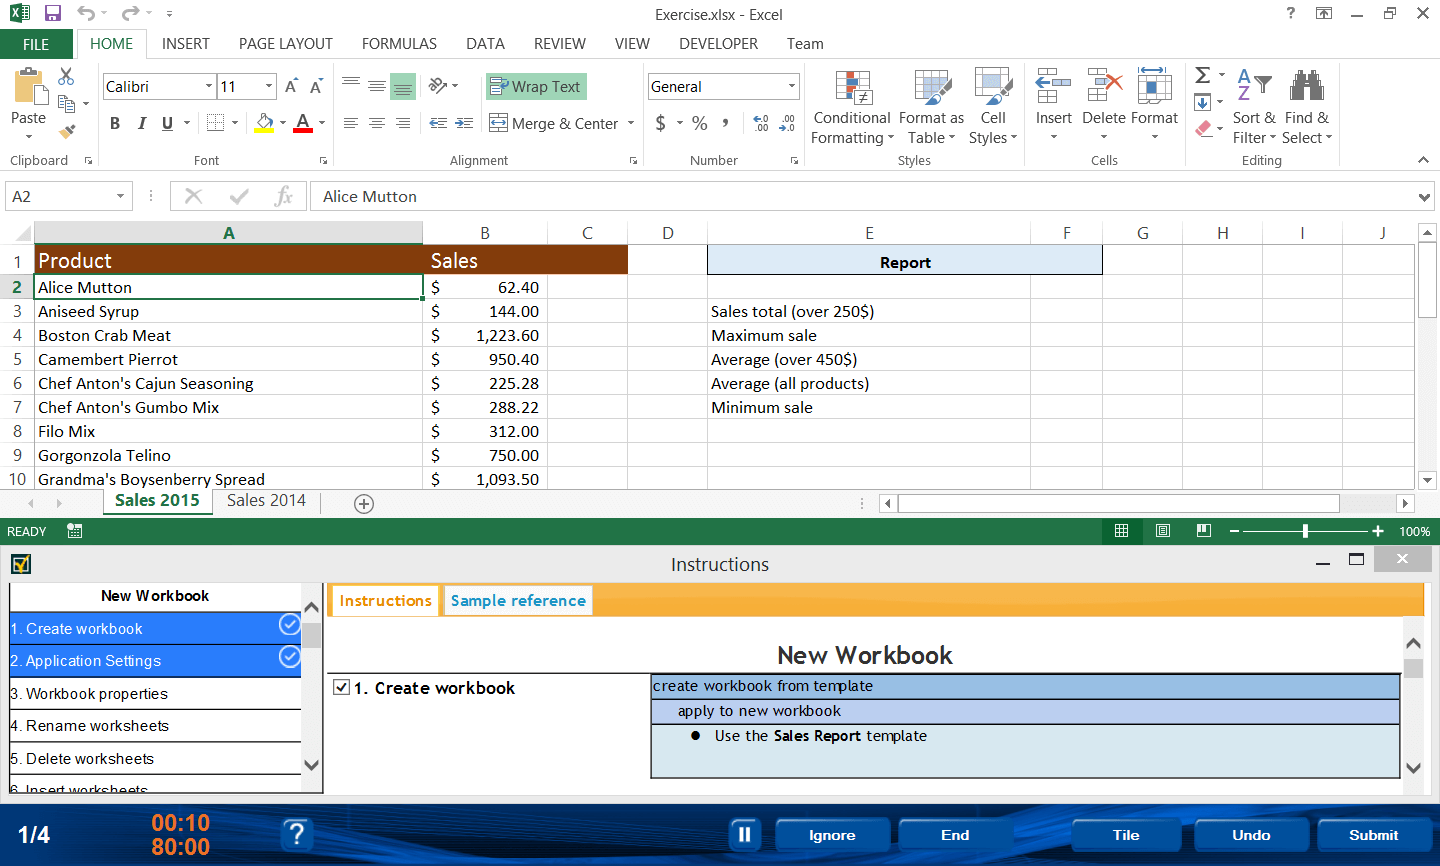 mos microsoft office excel 2013